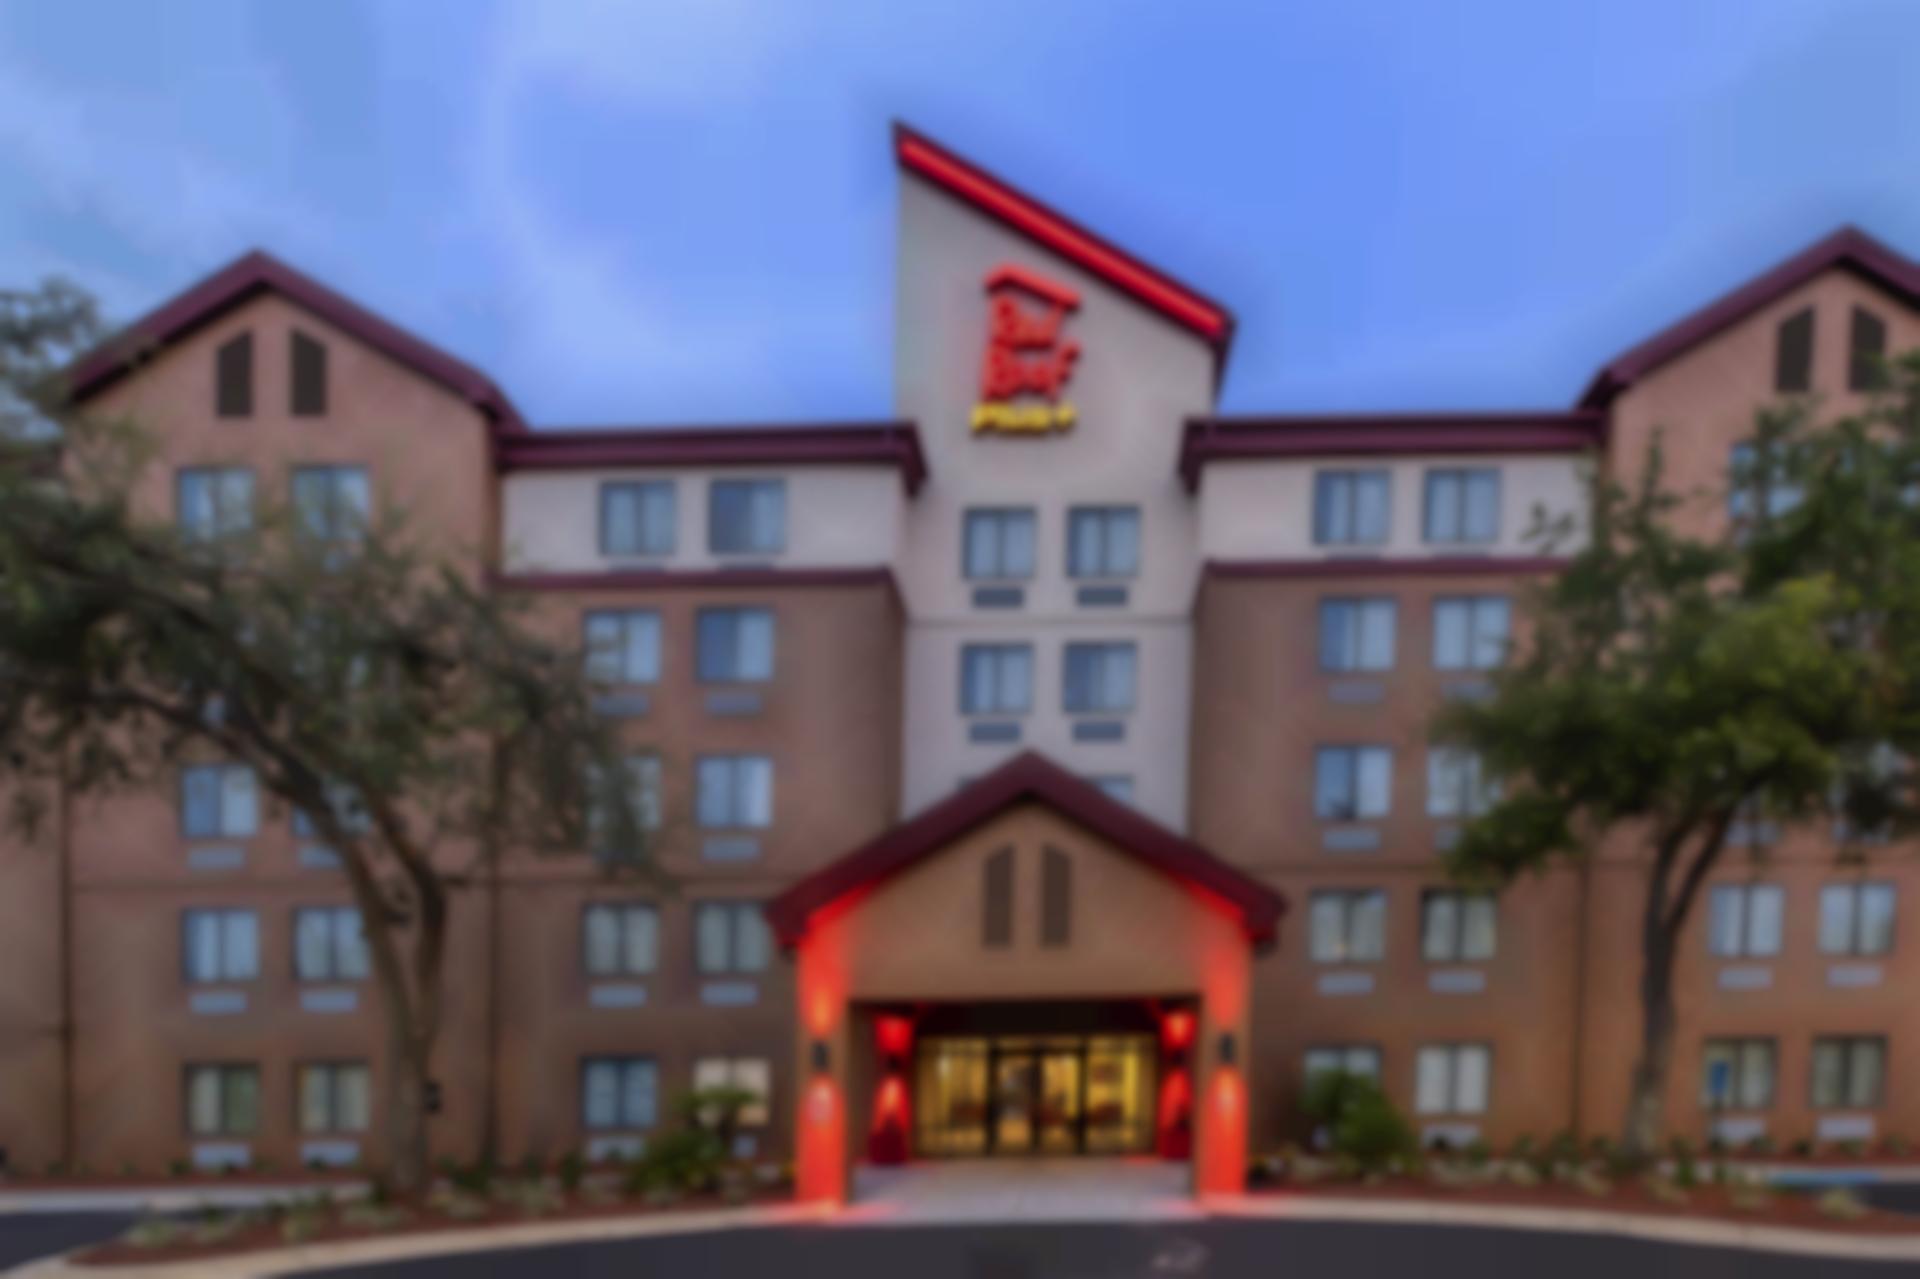 Red Roof Inn PLUS+ Jacksonville - Southpoint